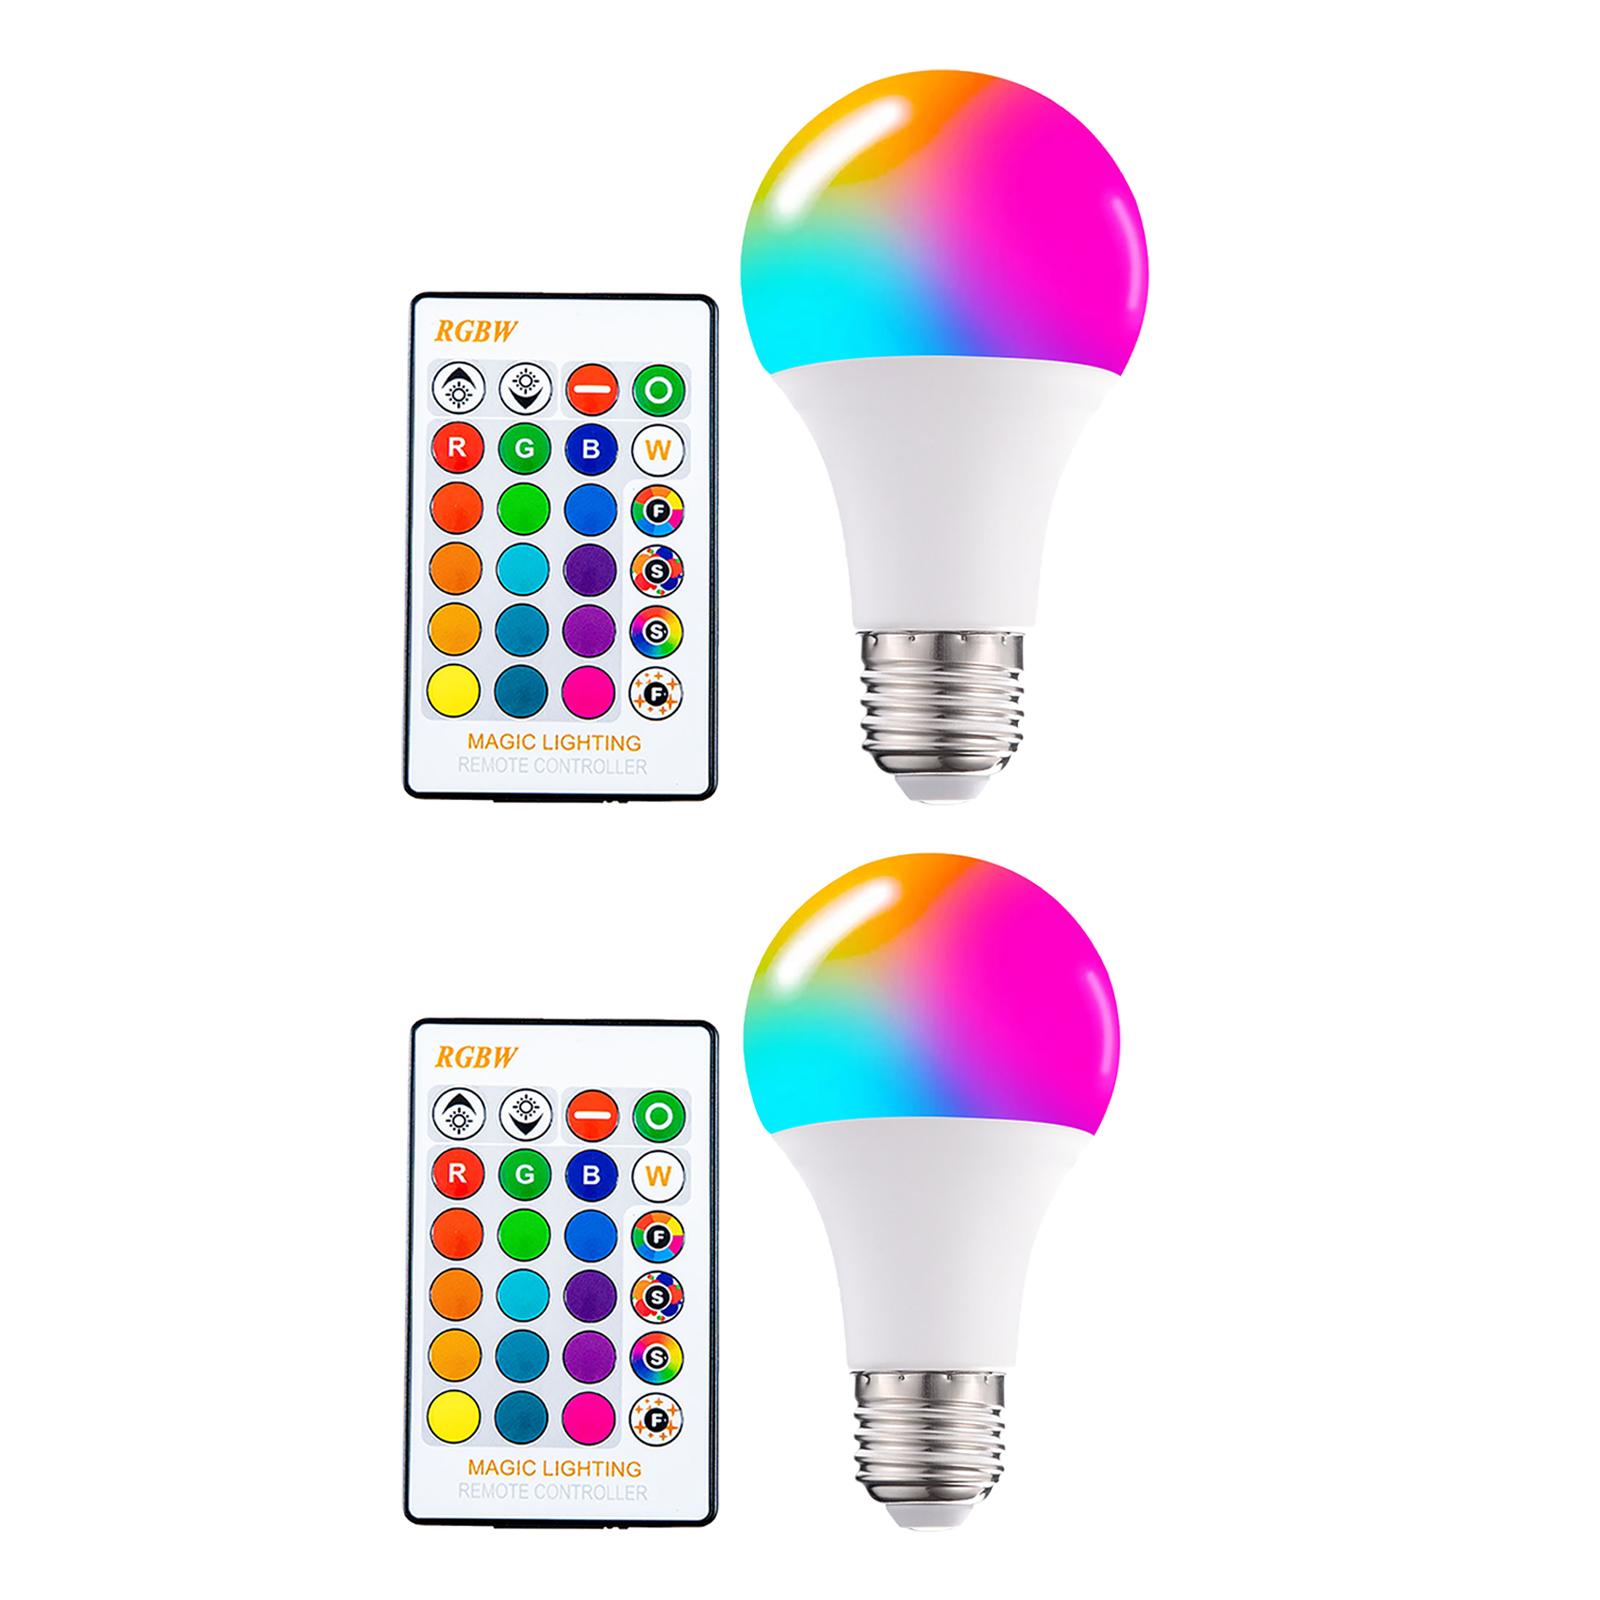 RGB Light Bulb,RGB LED Light Bulb with Remote,Color Changing Light Bulbs  Dimmable E26 Screw,Home Decor Bedroom Stage Party Living Room,Flood Light  Bulbs Mood Light,Bar